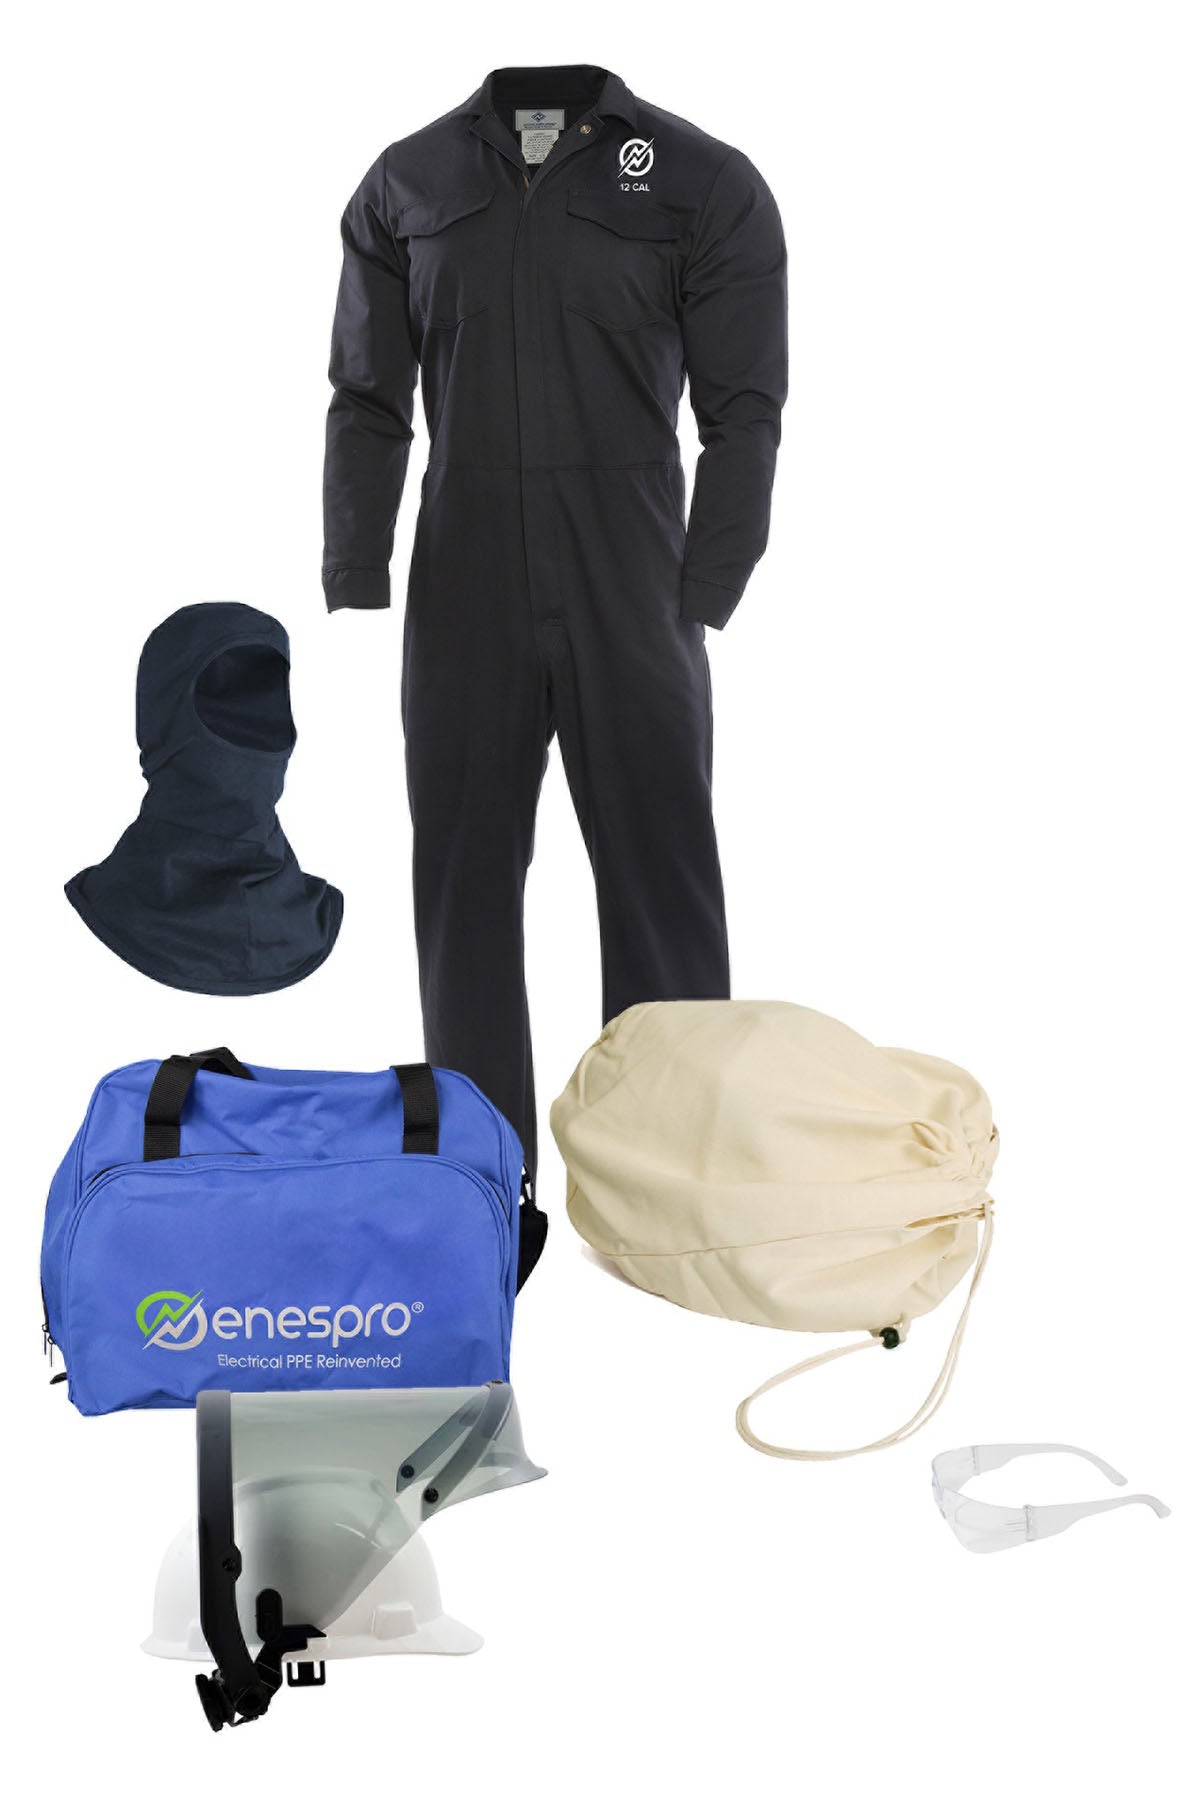 Enespro ArcGuard 12 cal Coverall Arc Flash Kit with Balaclava- No Gloves